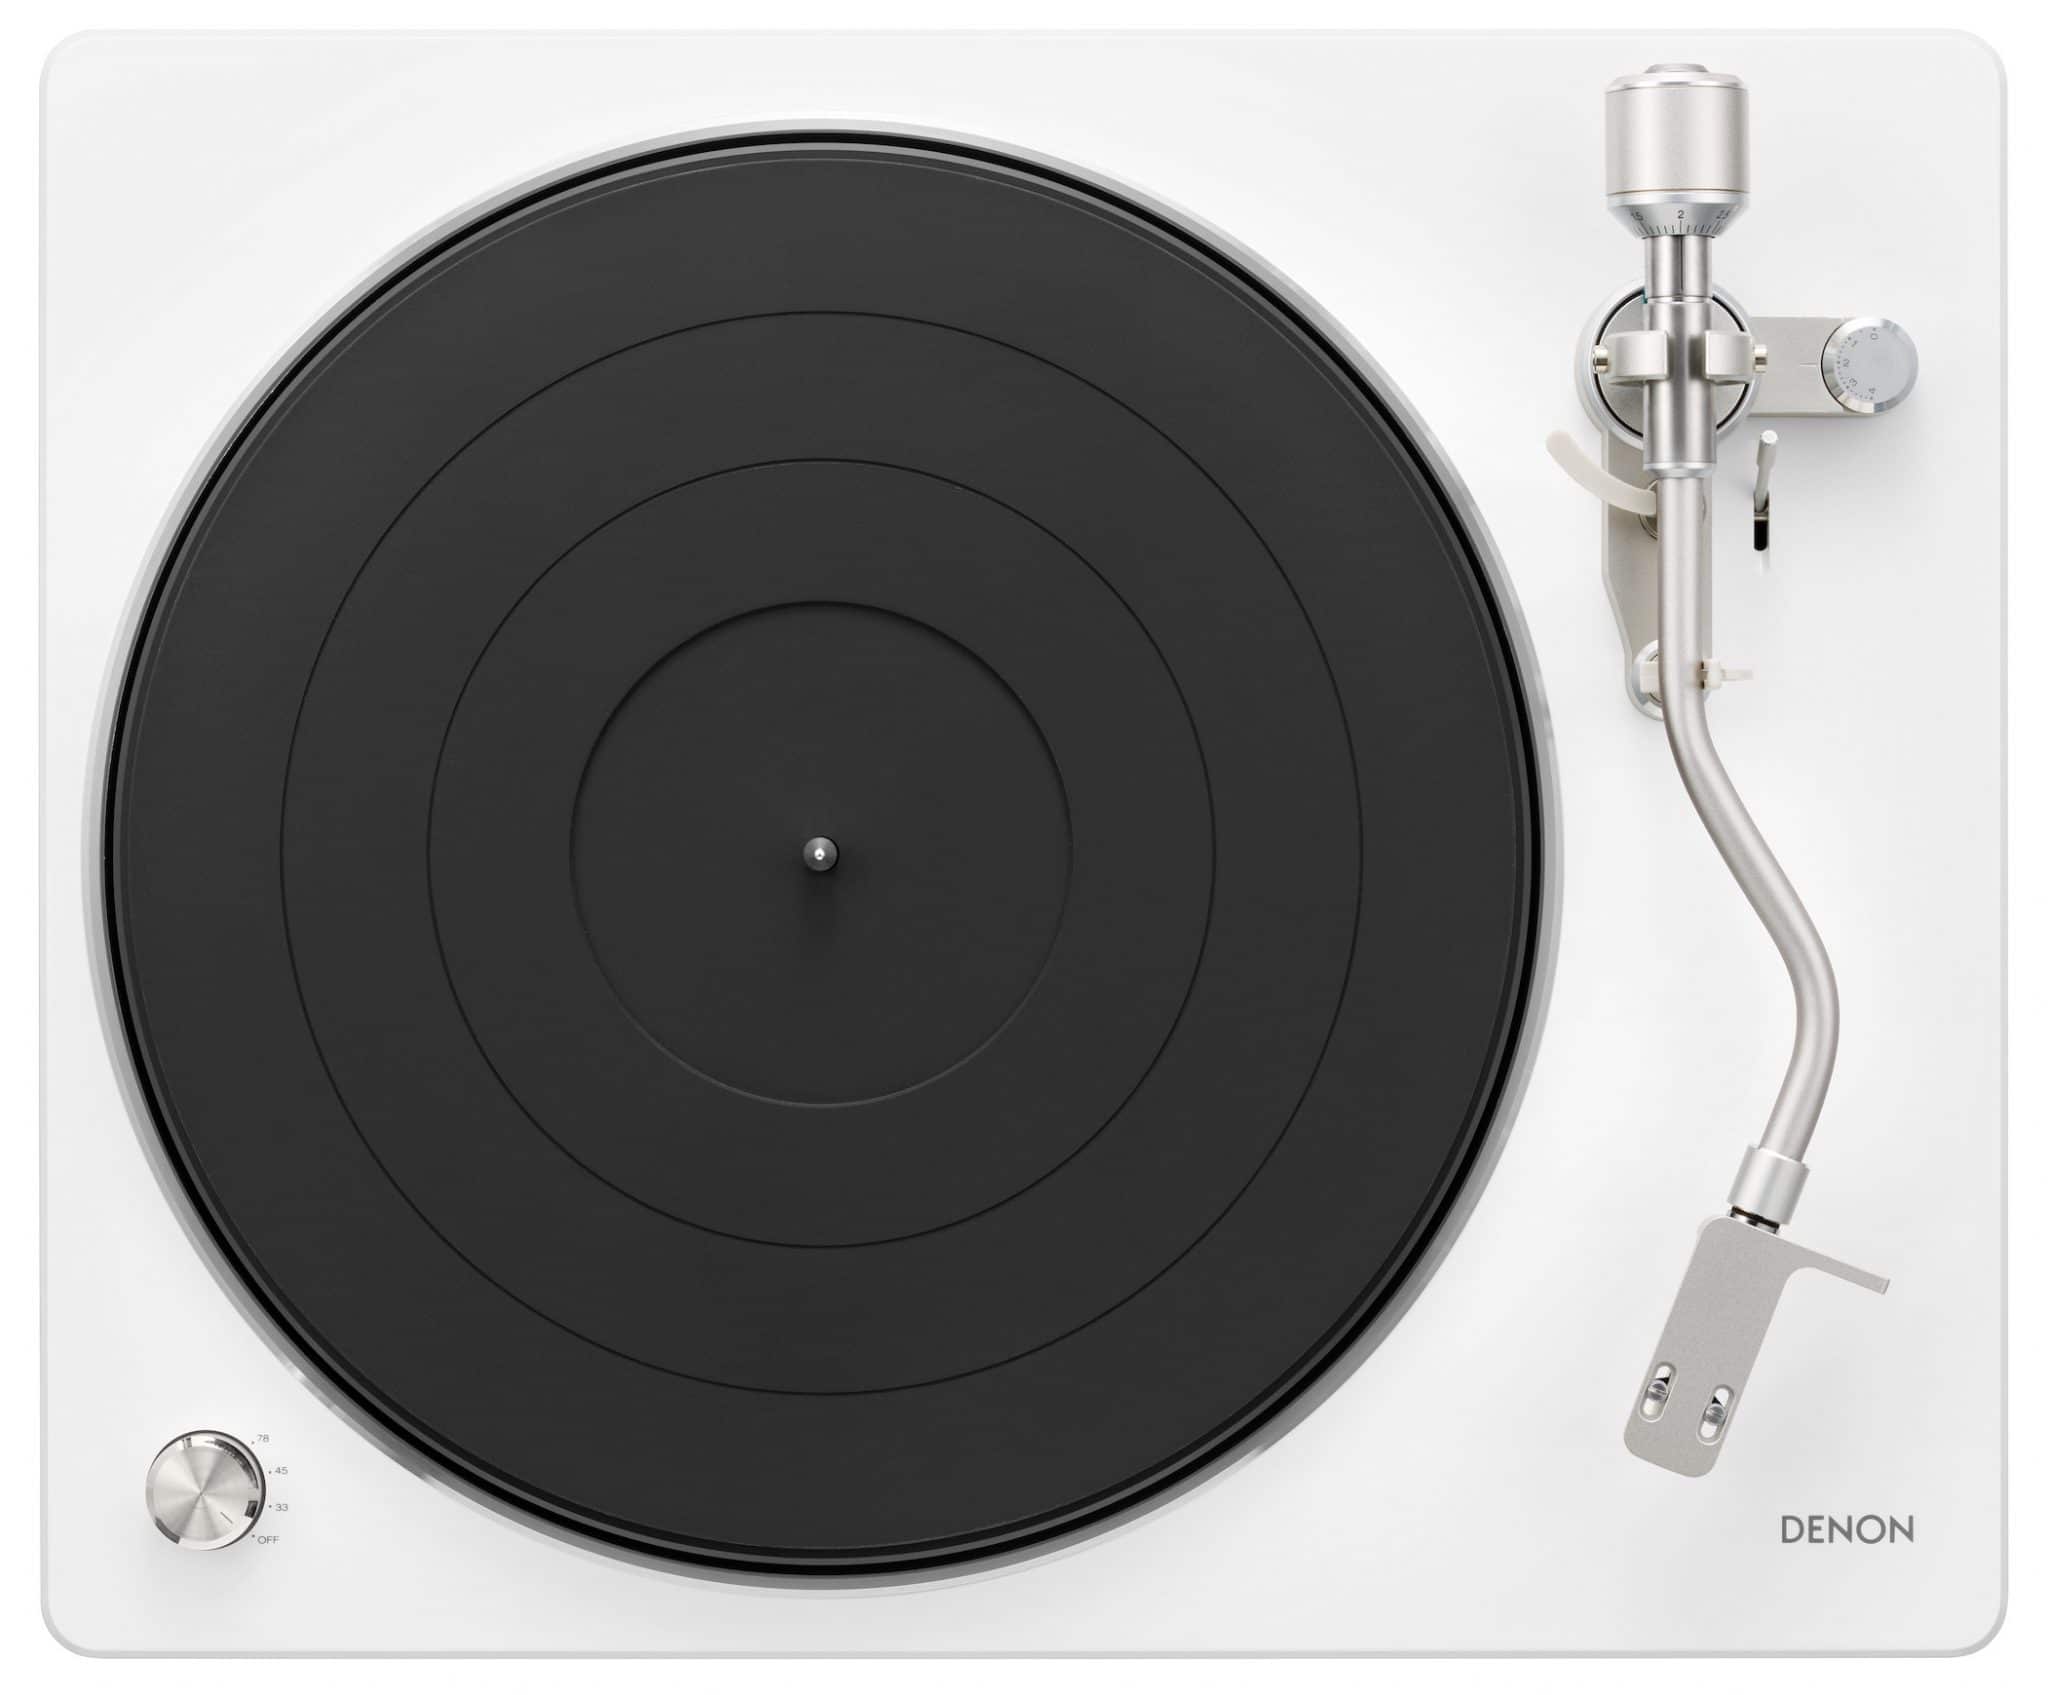 DP-400 and DP-450USB Turntables from Denon